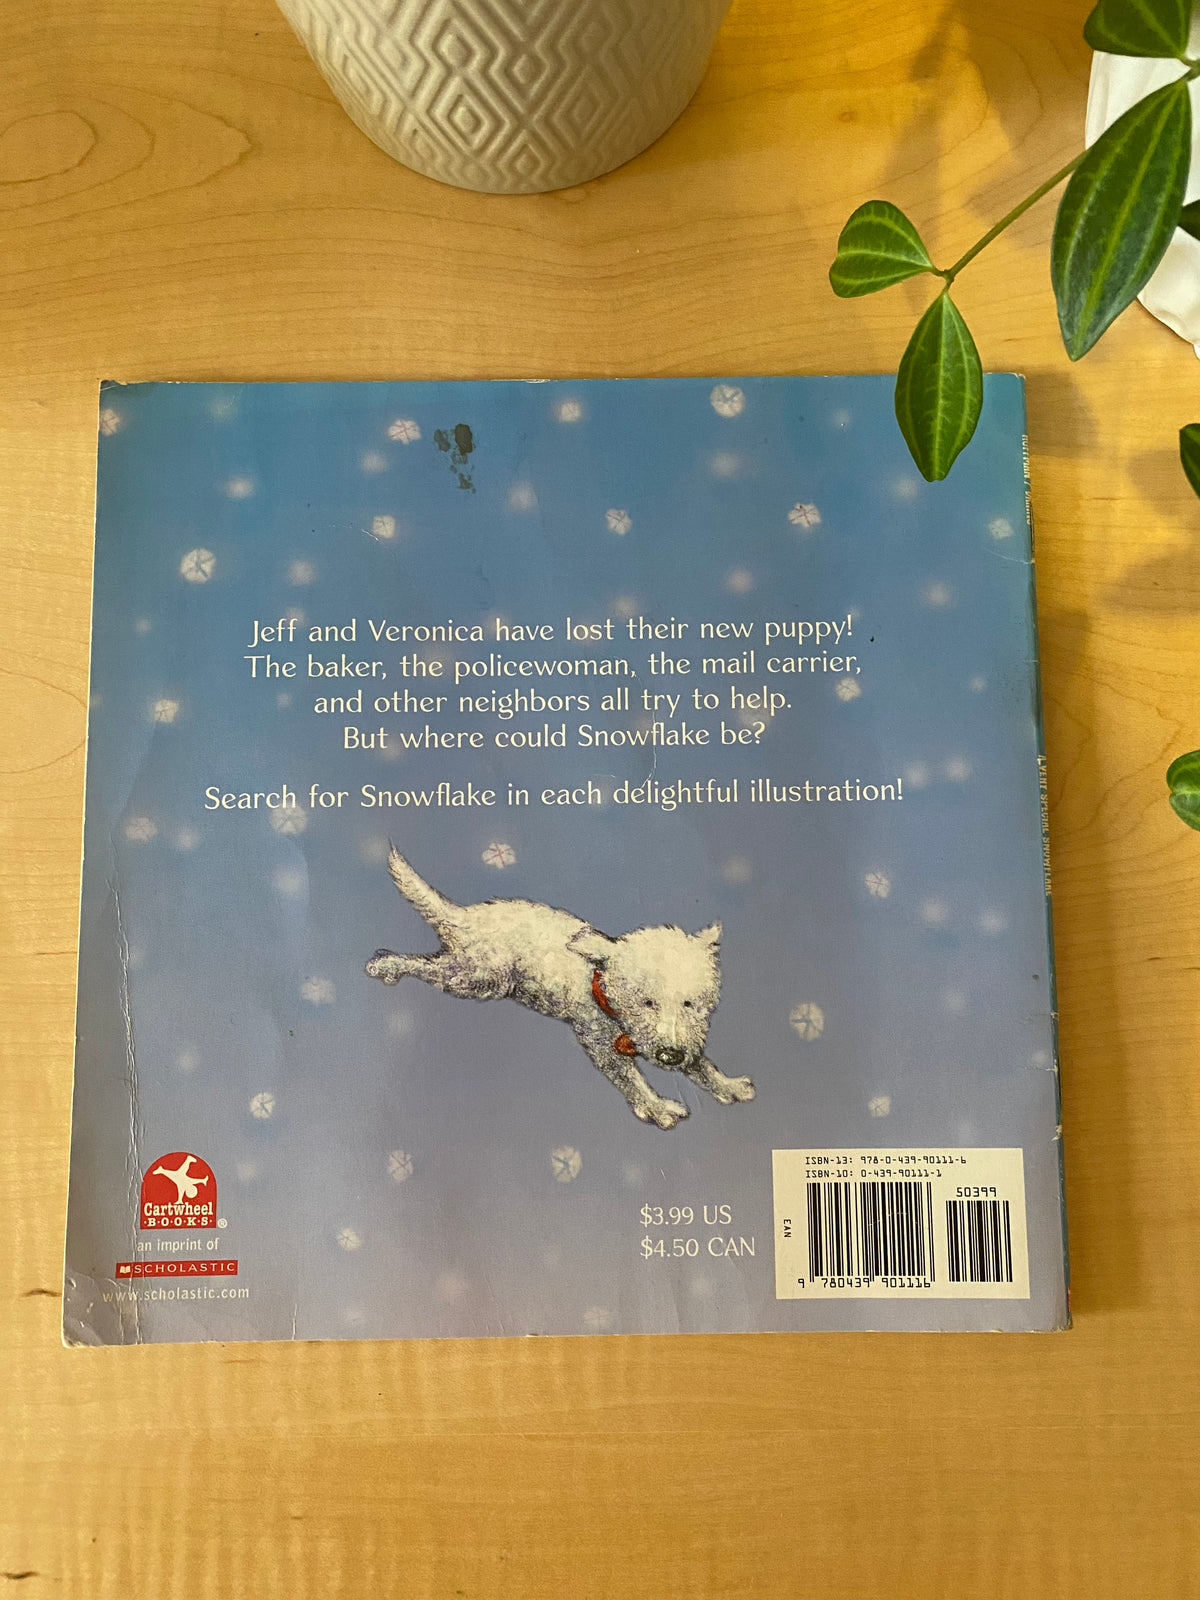 Book - A Very Special Snowflake